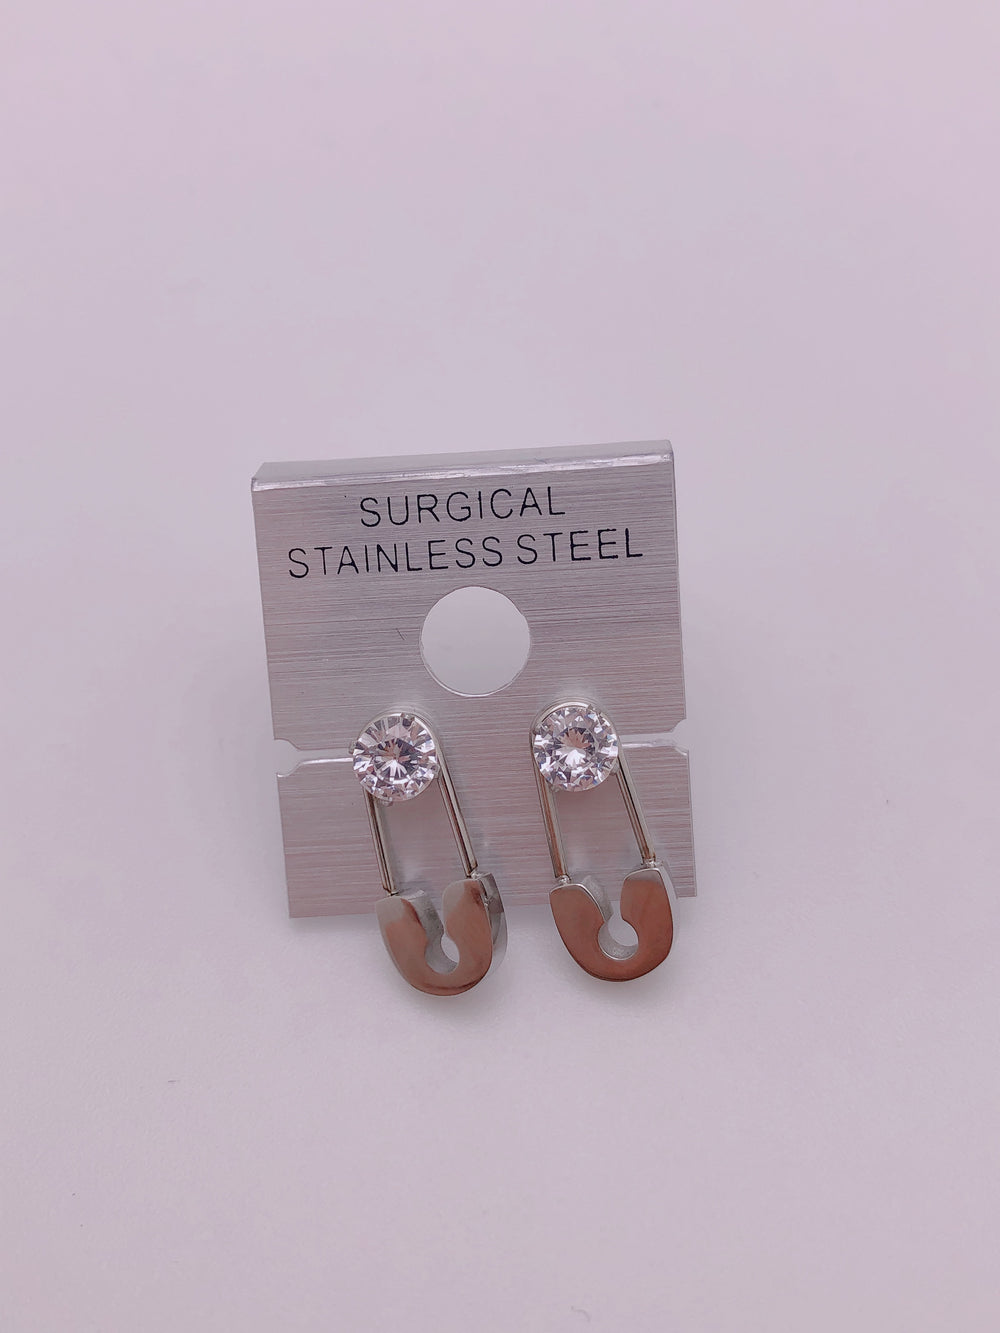 Surgical stainless steel  safety pin earrings